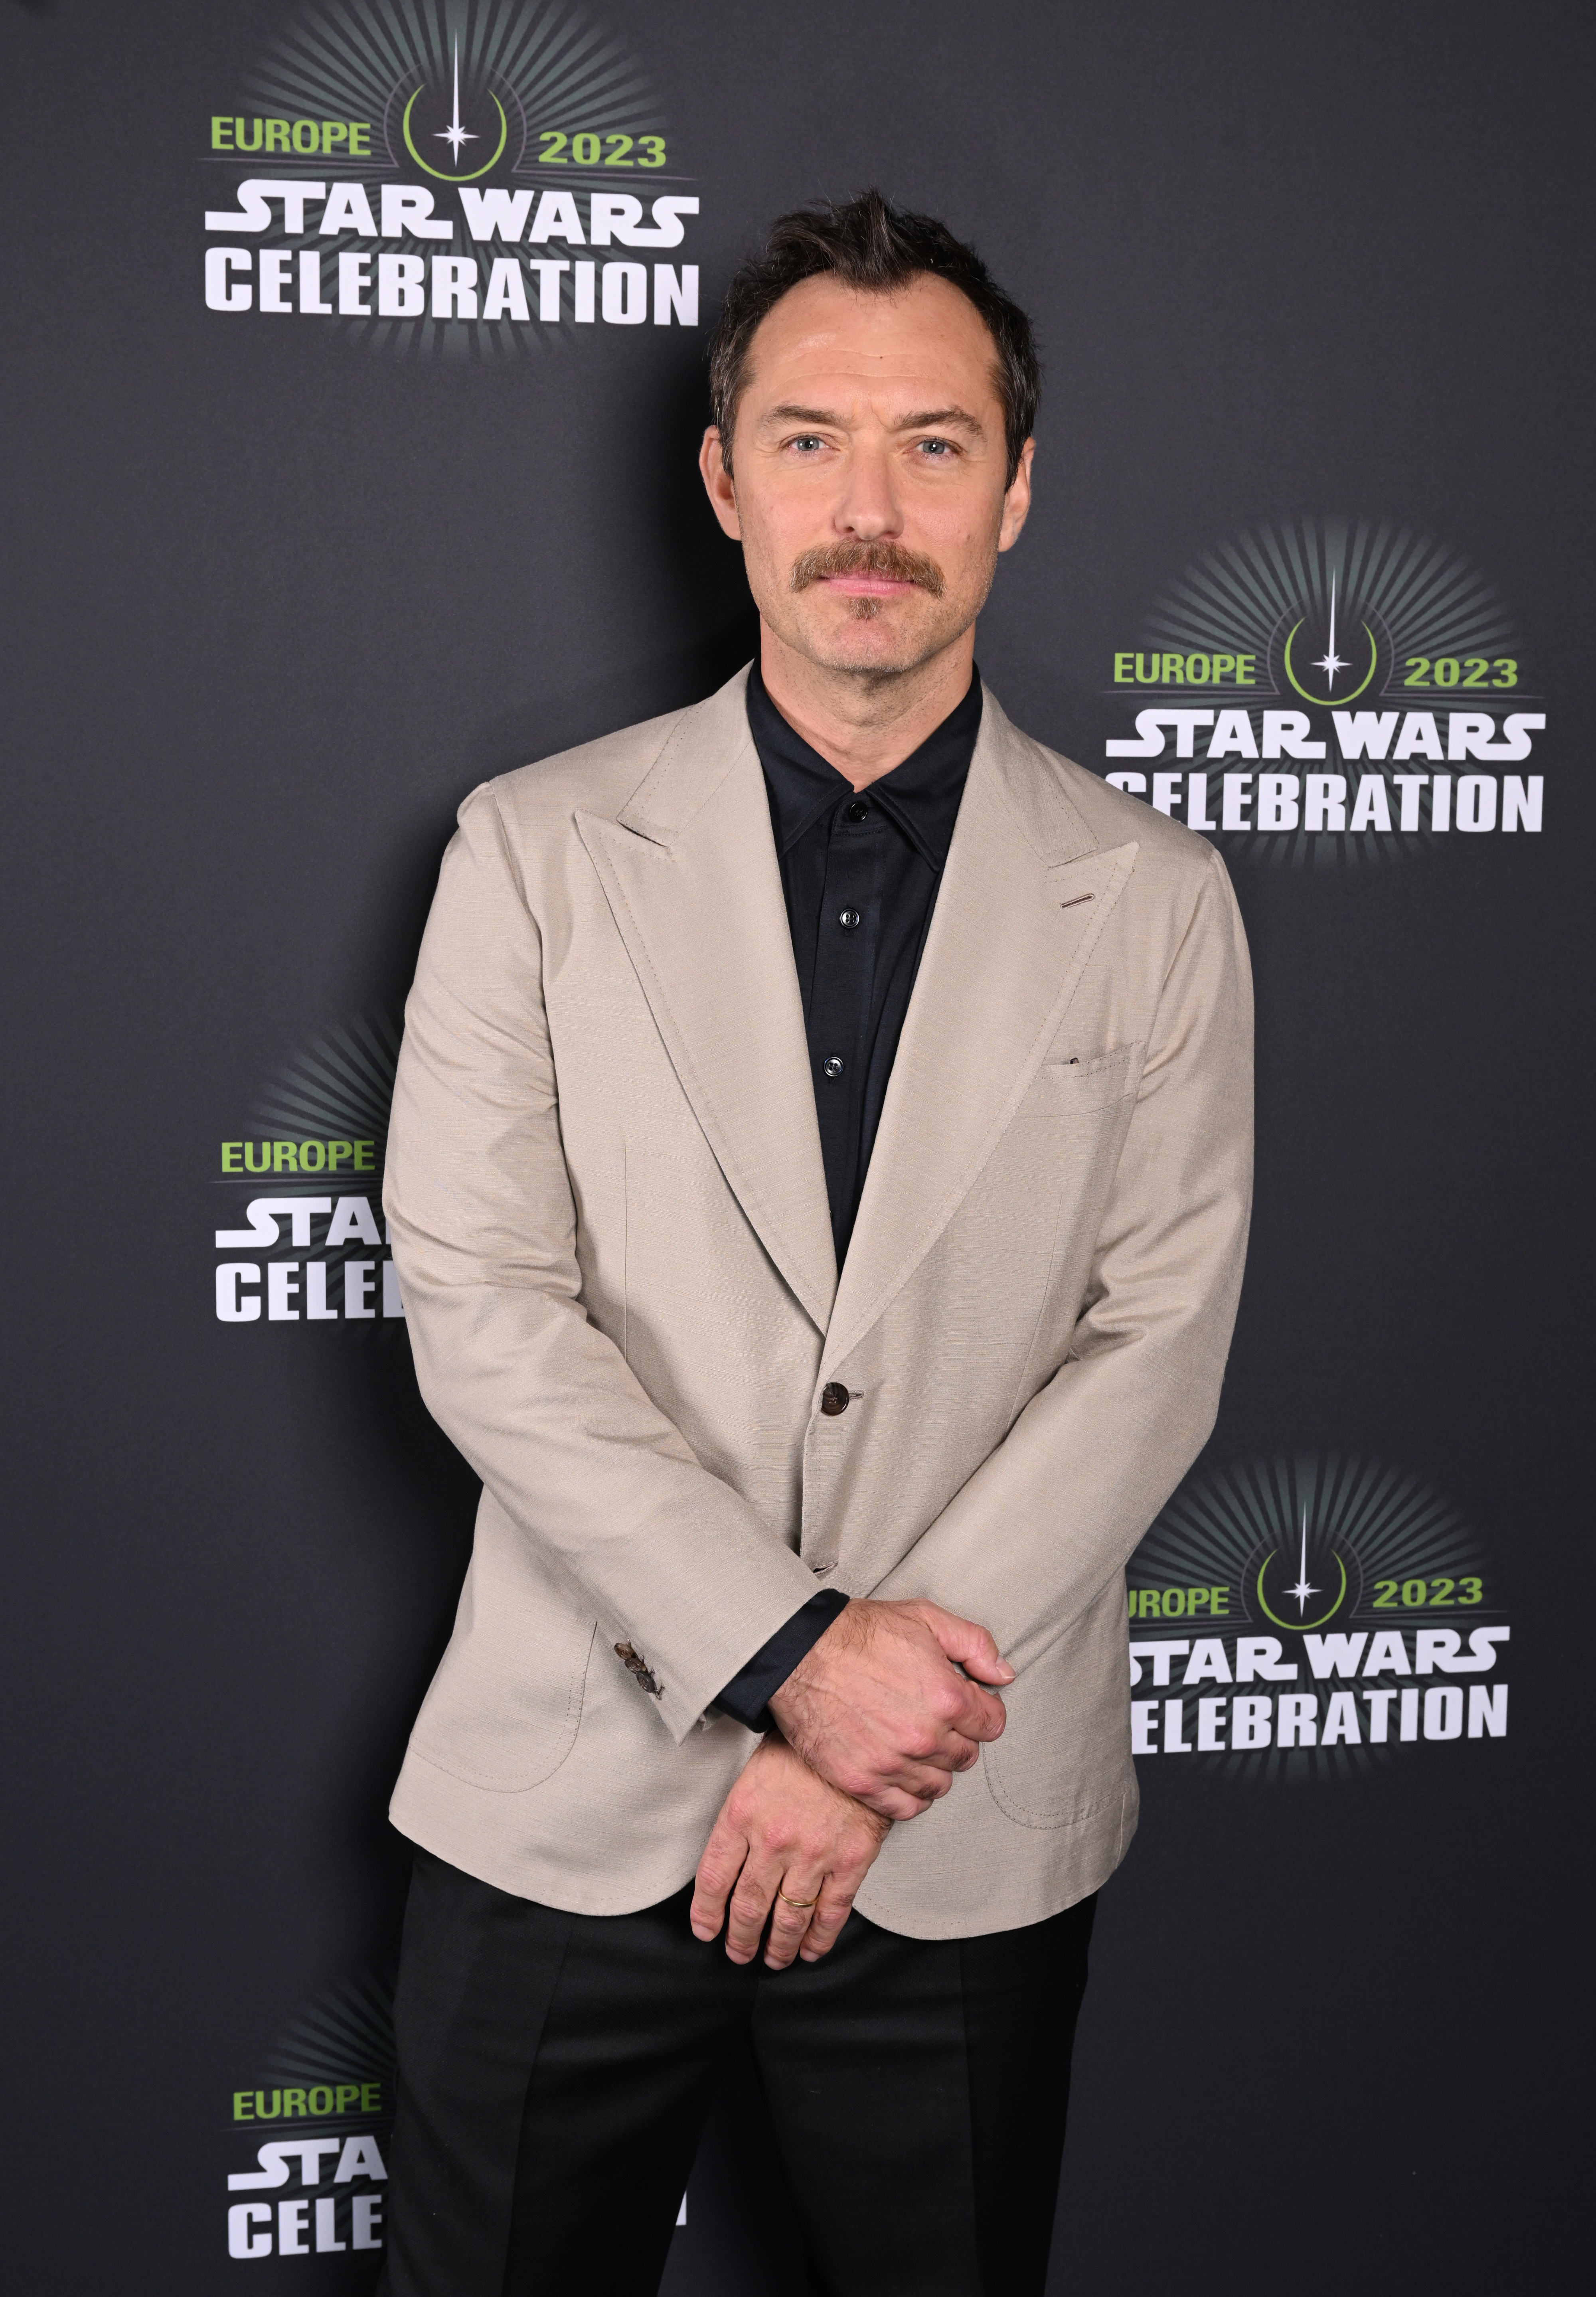 Ewan McGregor stands with hands clasped, wearing a beige blazer over a black shirt at the Star Wars Celebration event